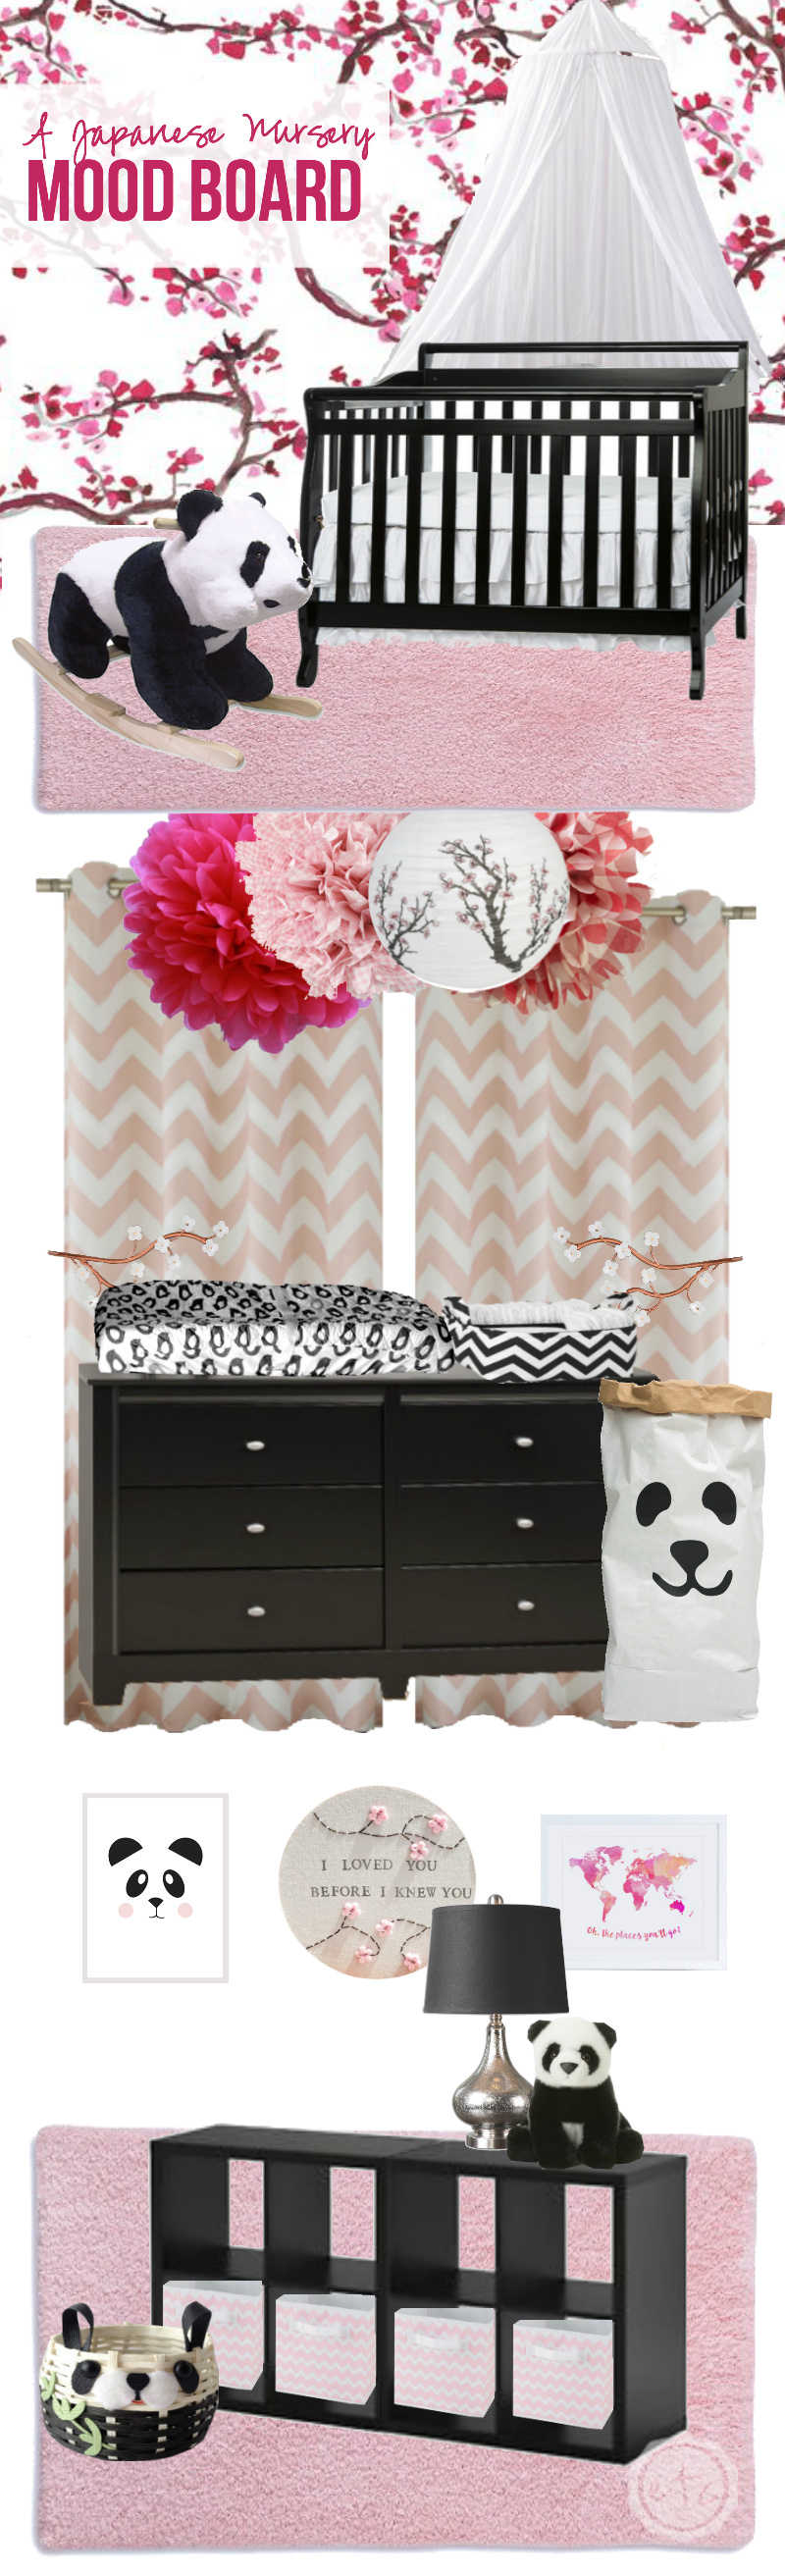 A Japanese Nursery Mood Board by Happily Ever After, Etc.